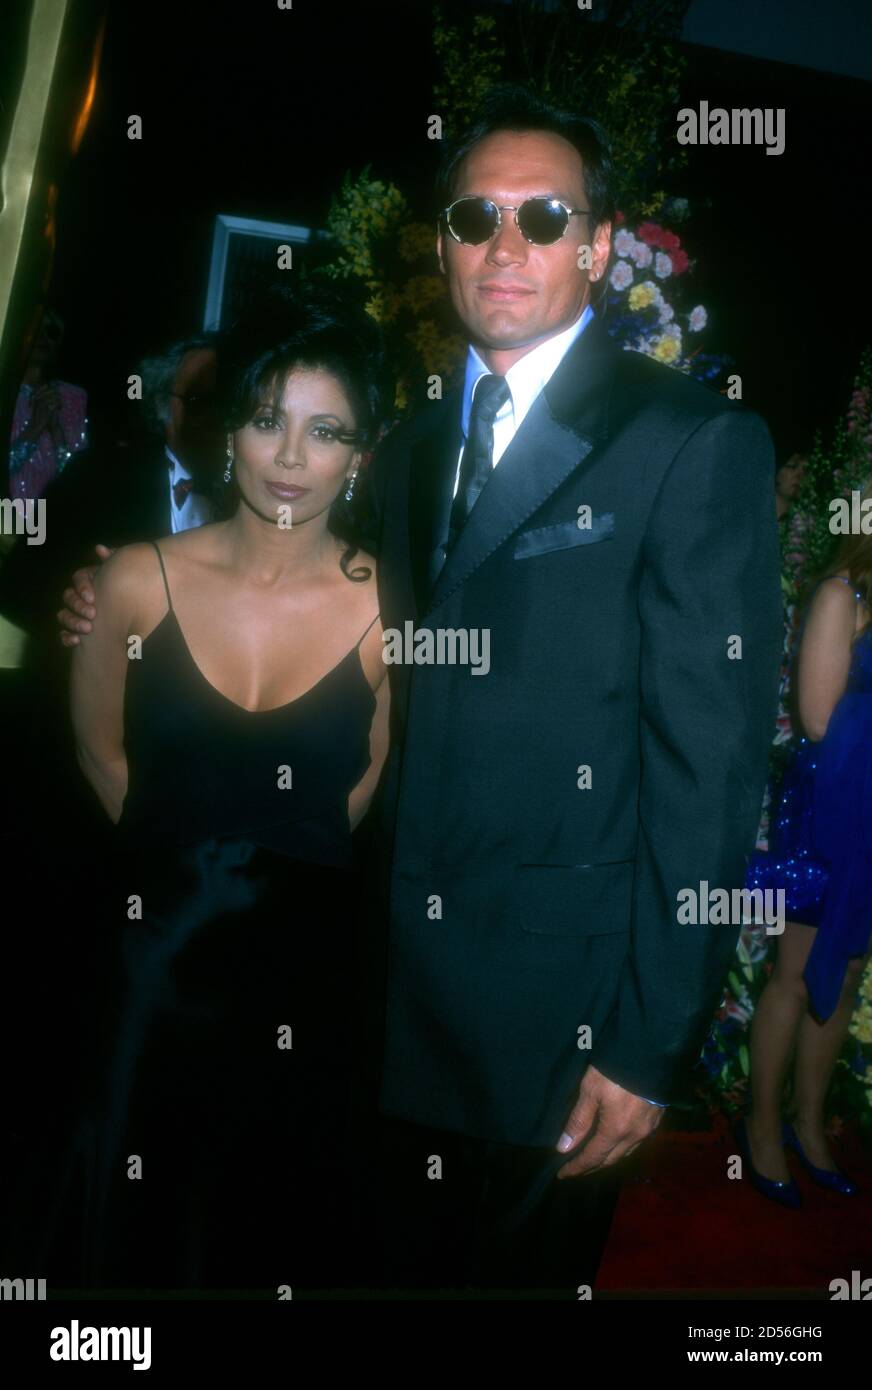 Los Angeles, California, USA 25th March 1996 Actor Jimmy Smits and Wanda De Jesus attend the 68th Annual Academy Awards at Dorothy Chandler Pavilioin on March 25, 1996 in Los Angeles, California, USA. Photo by Barry King/Alamy Stock Photo Stock Photo